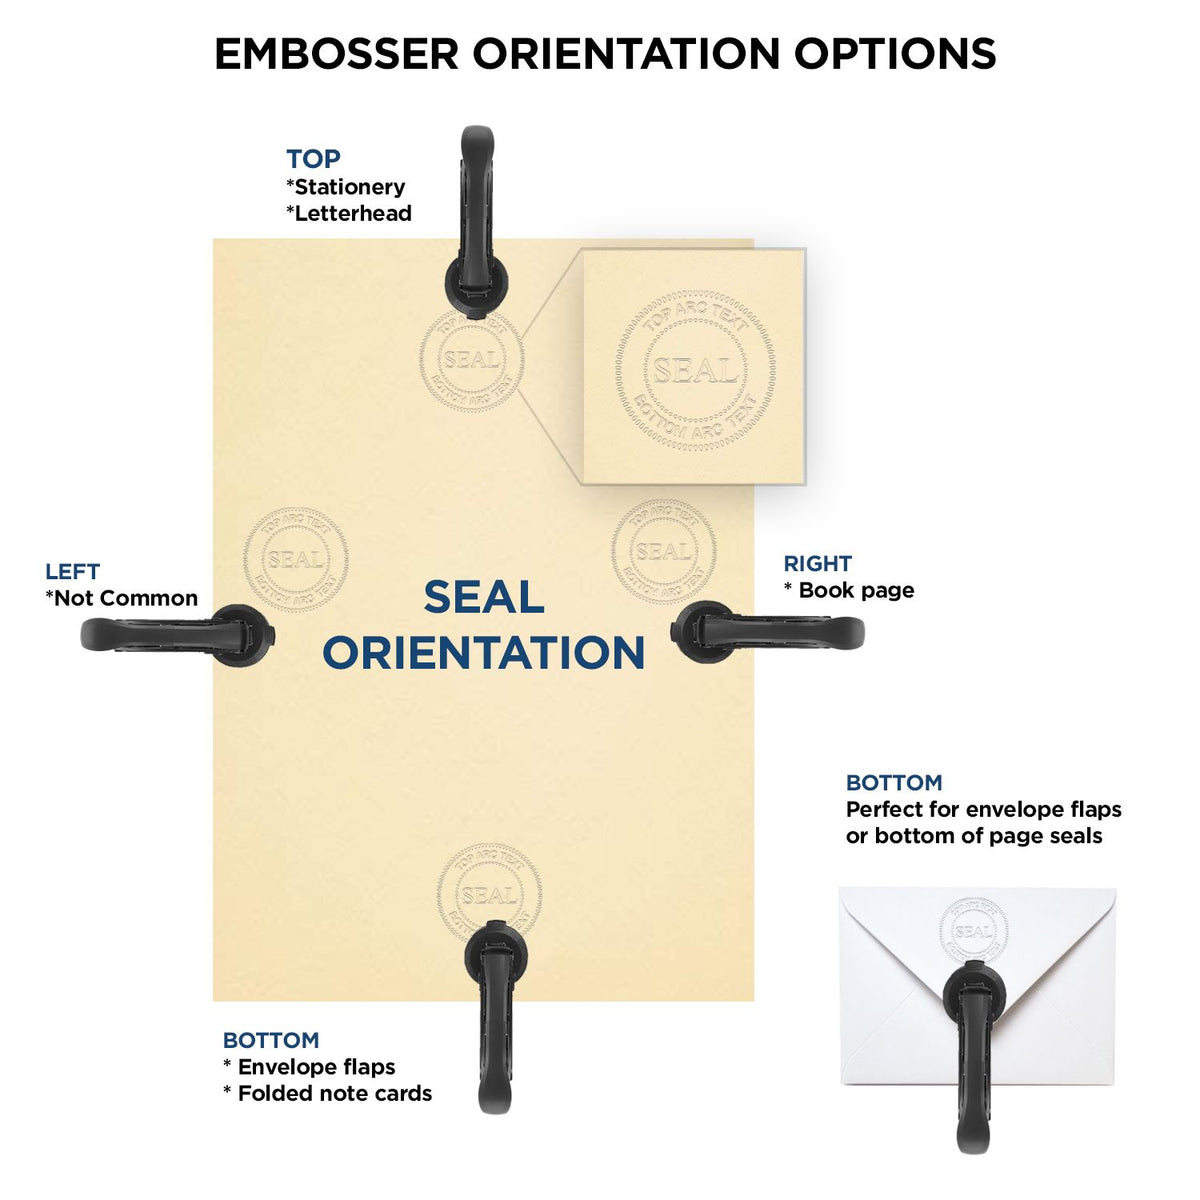 An infographic for the Heavy Duty Cast Iron New Mexico Architect Embosser showing embosser orientation, this is showing examples of a top, bottom, right and left insert.